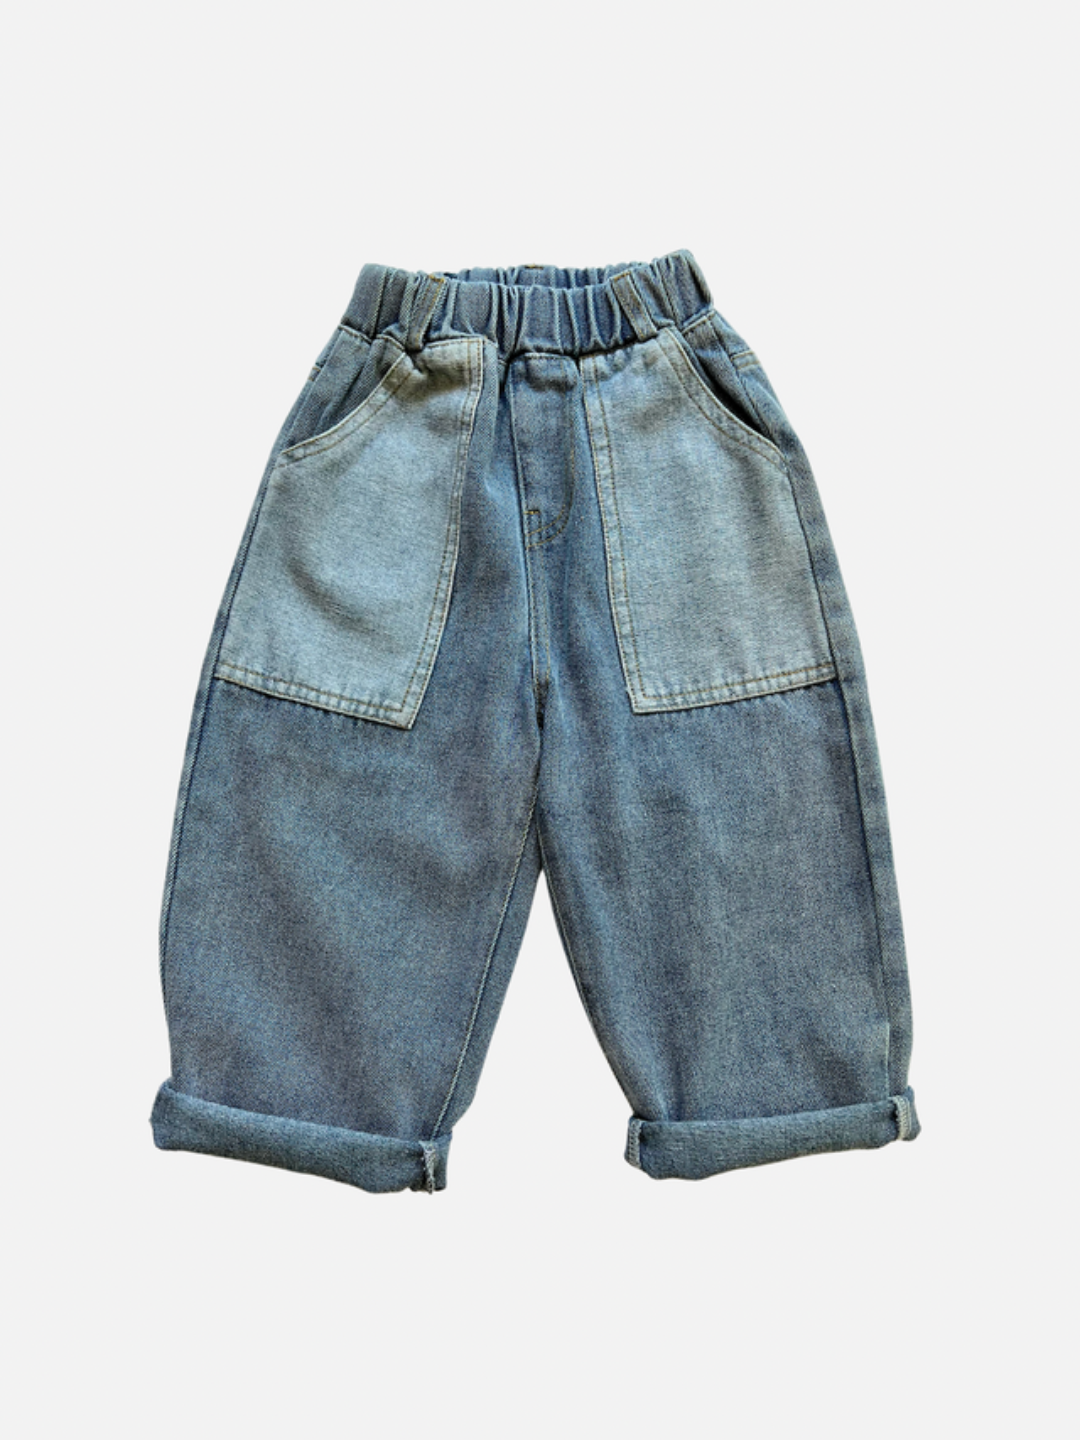 A pair of kids' jeans in mid denim with pale denim pockets